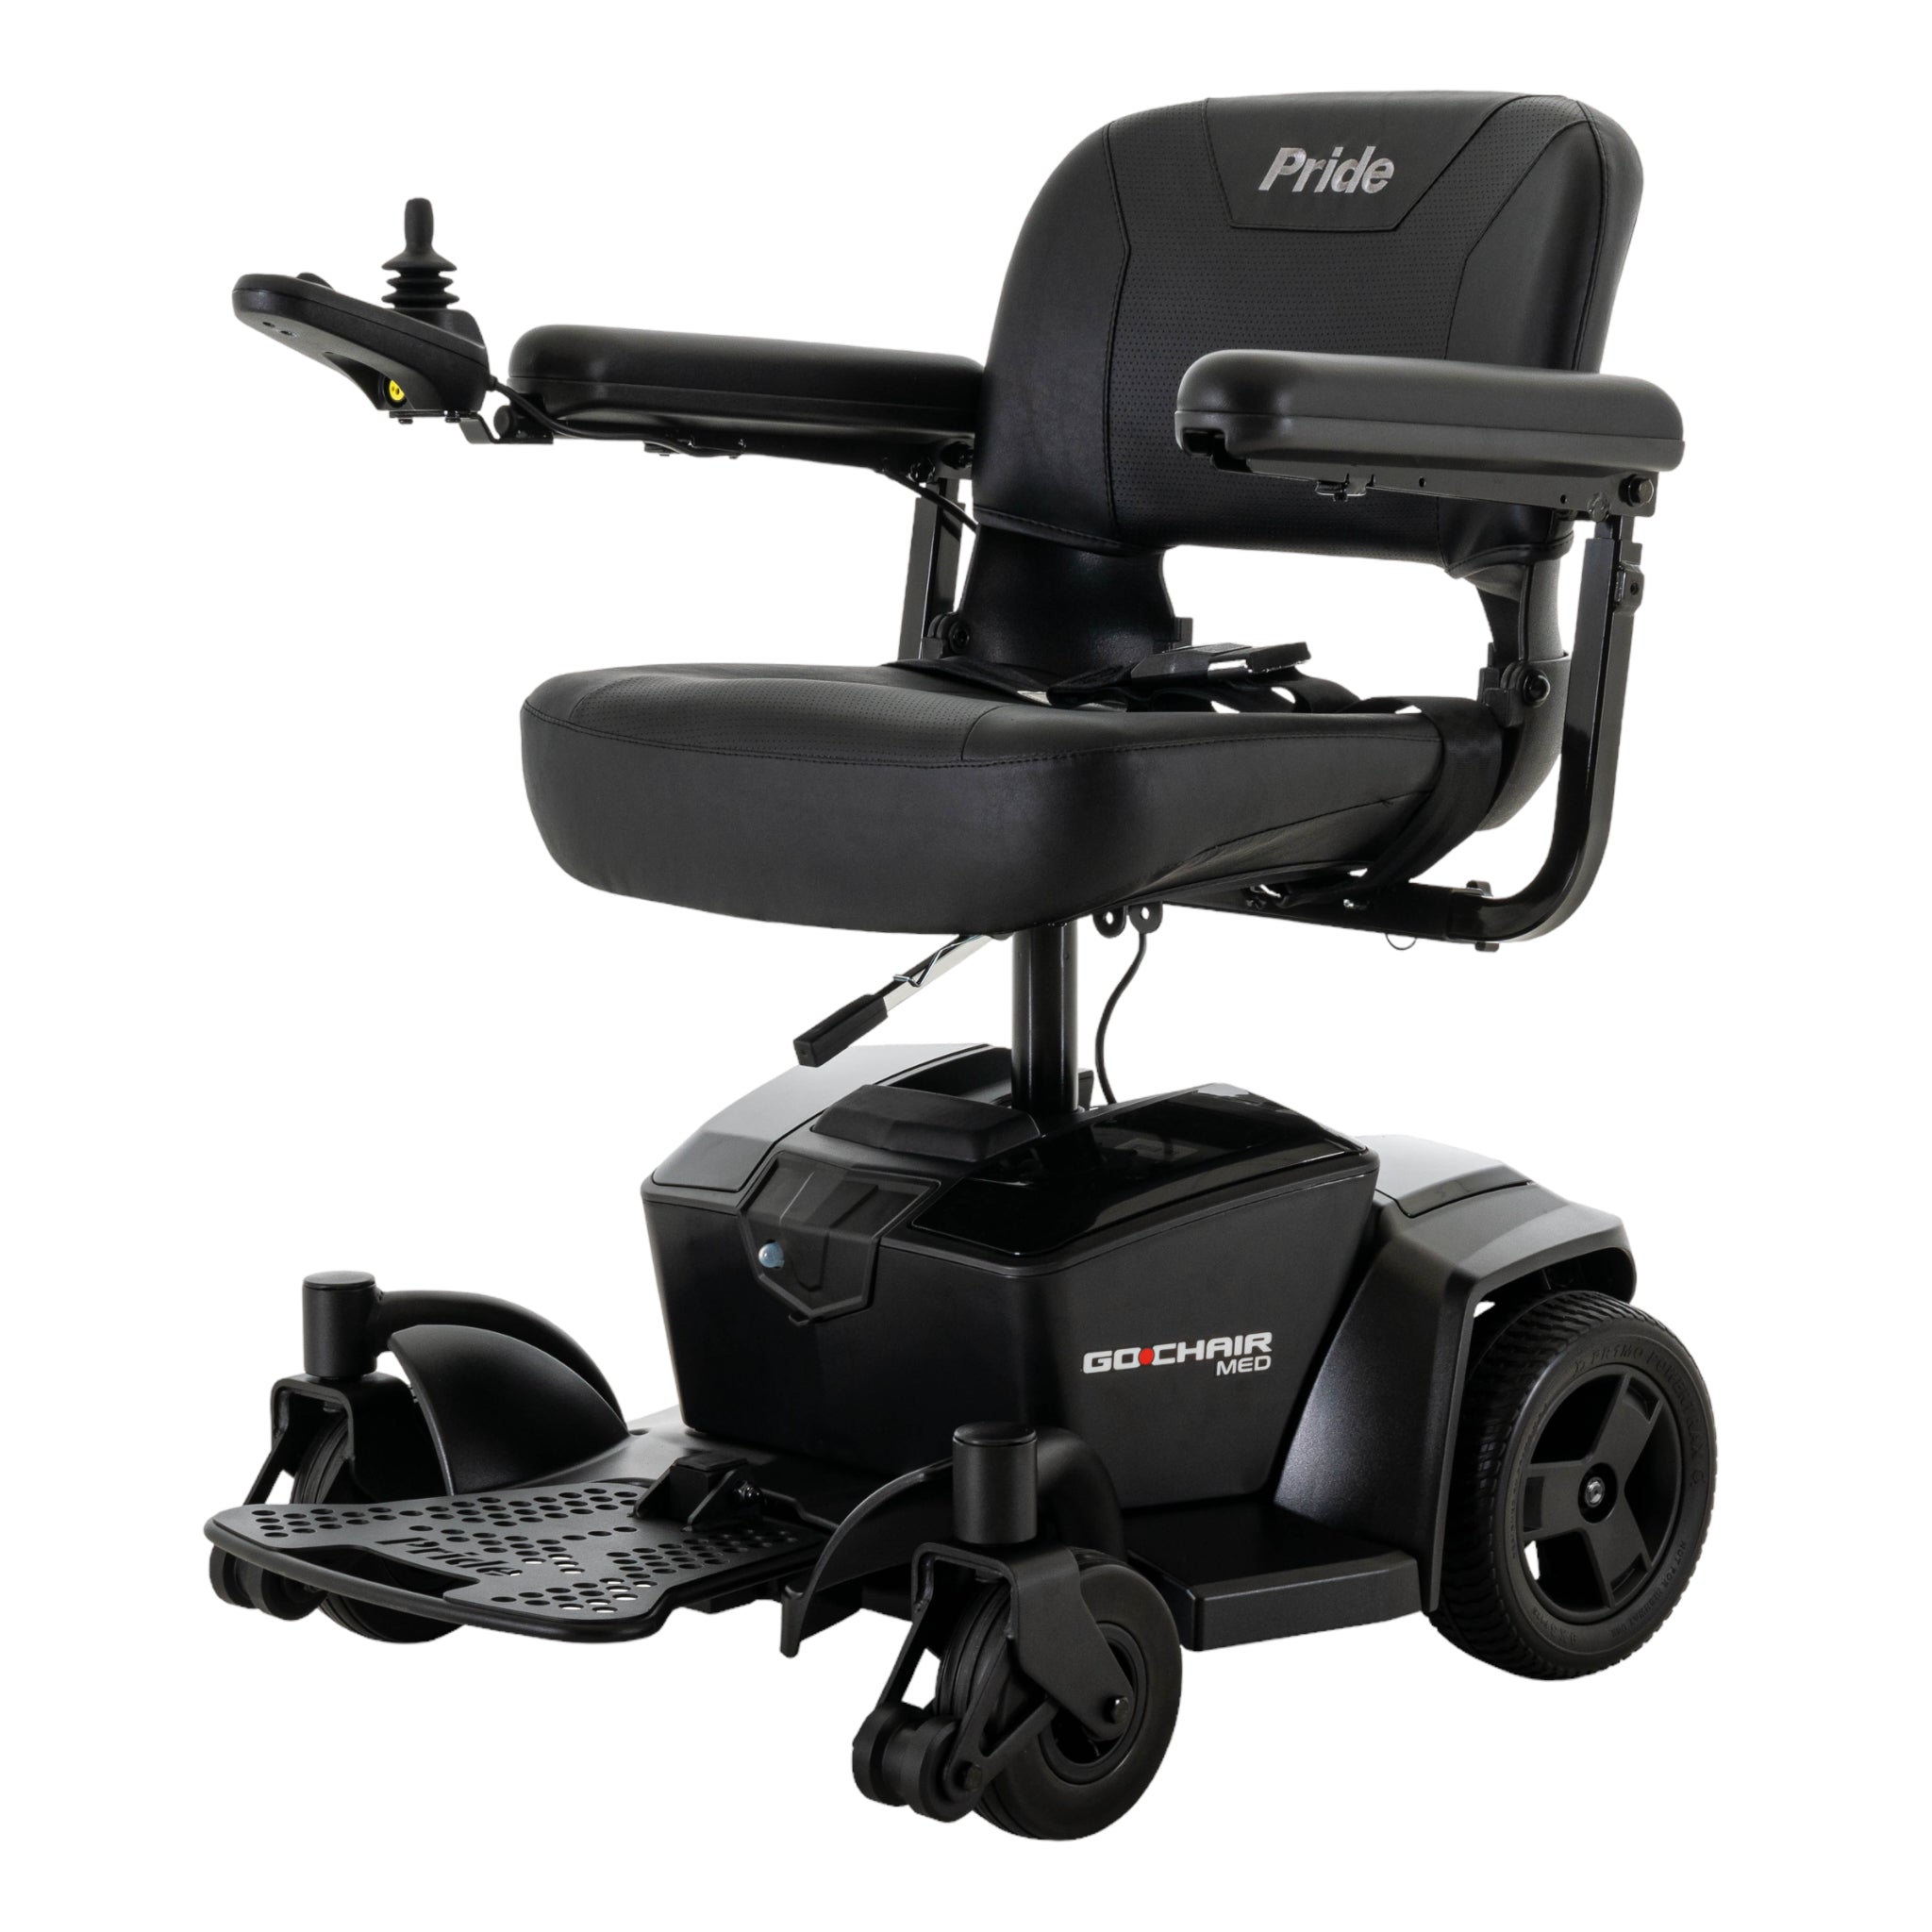 Navigating outdoor spaces made easy with Pride Mobility's new